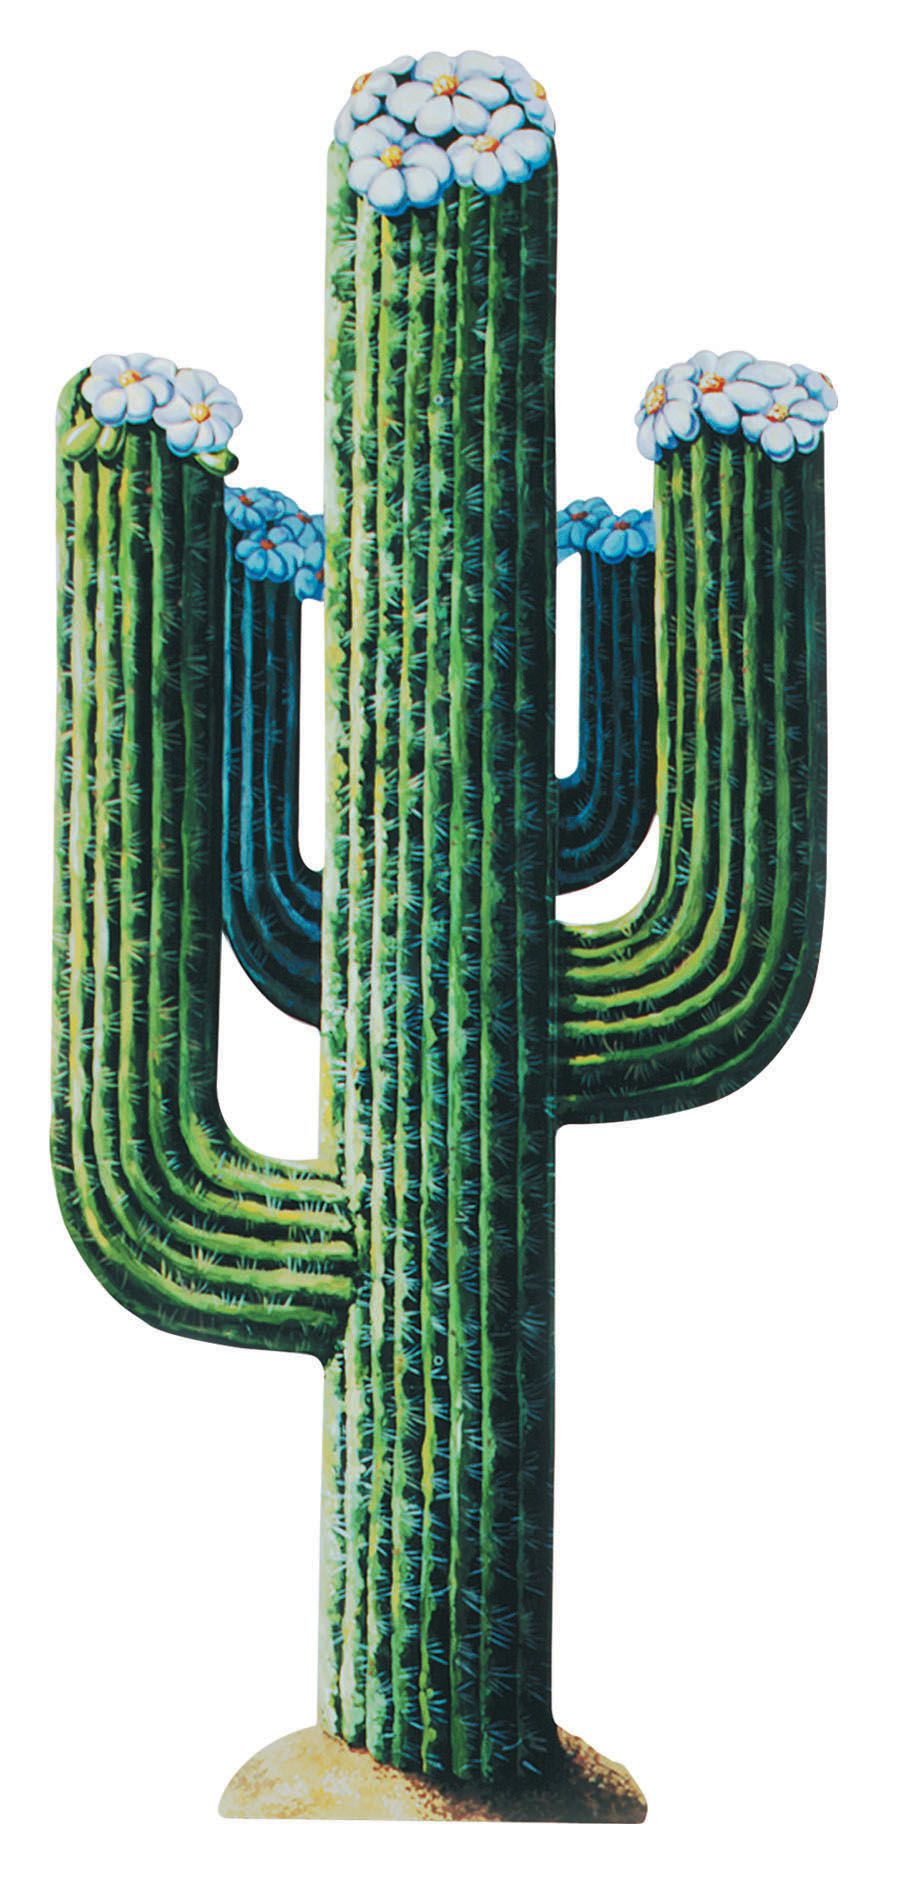 Cactus Jointed Cutout Wall Decoration - 1.3m